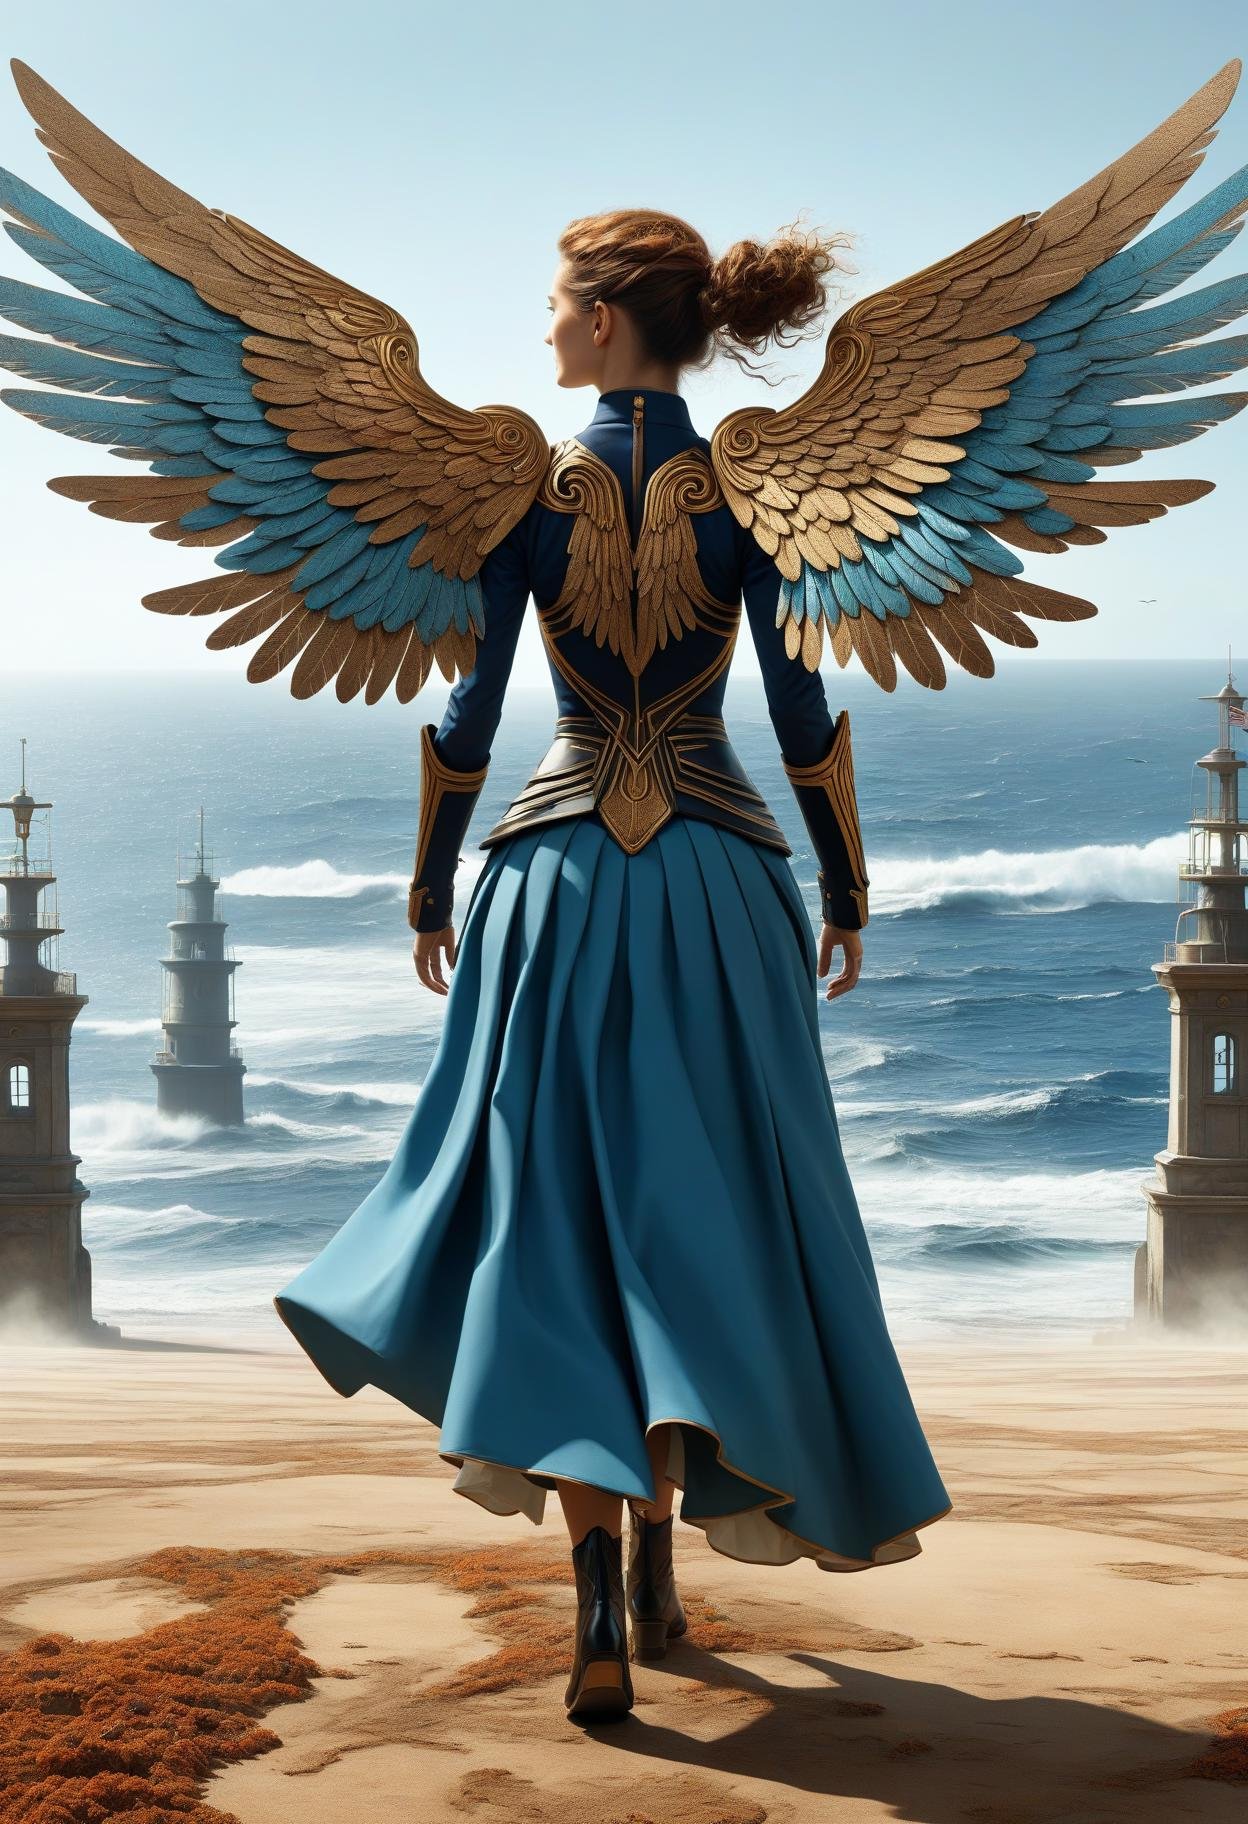 awesome quality, dynamic,DonMDr4g0nXL woman from behind,wings attached to back,skirt, (draconid:0.25) earthy ground air, ocean, captain's quarters  <lora:myLora\DonMDr4g0nXL-v2rb:1>,